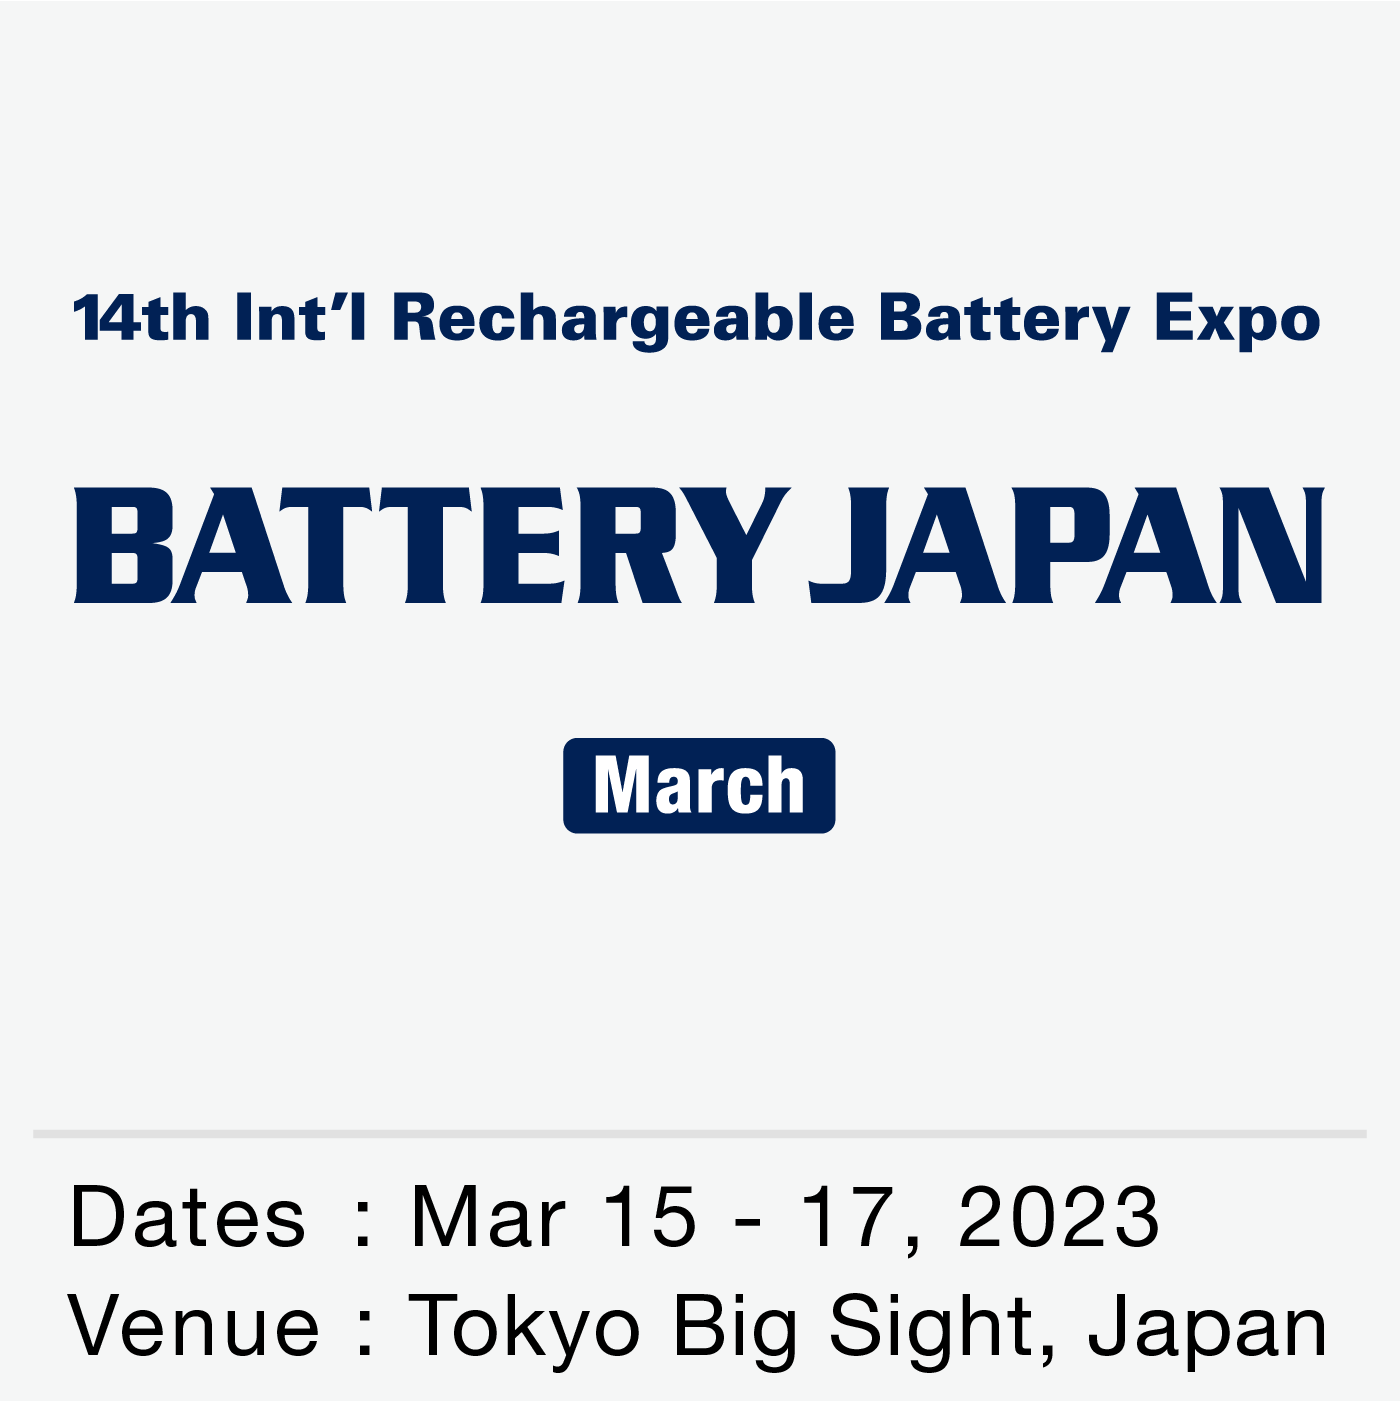 BATTERY JAPAN [March]